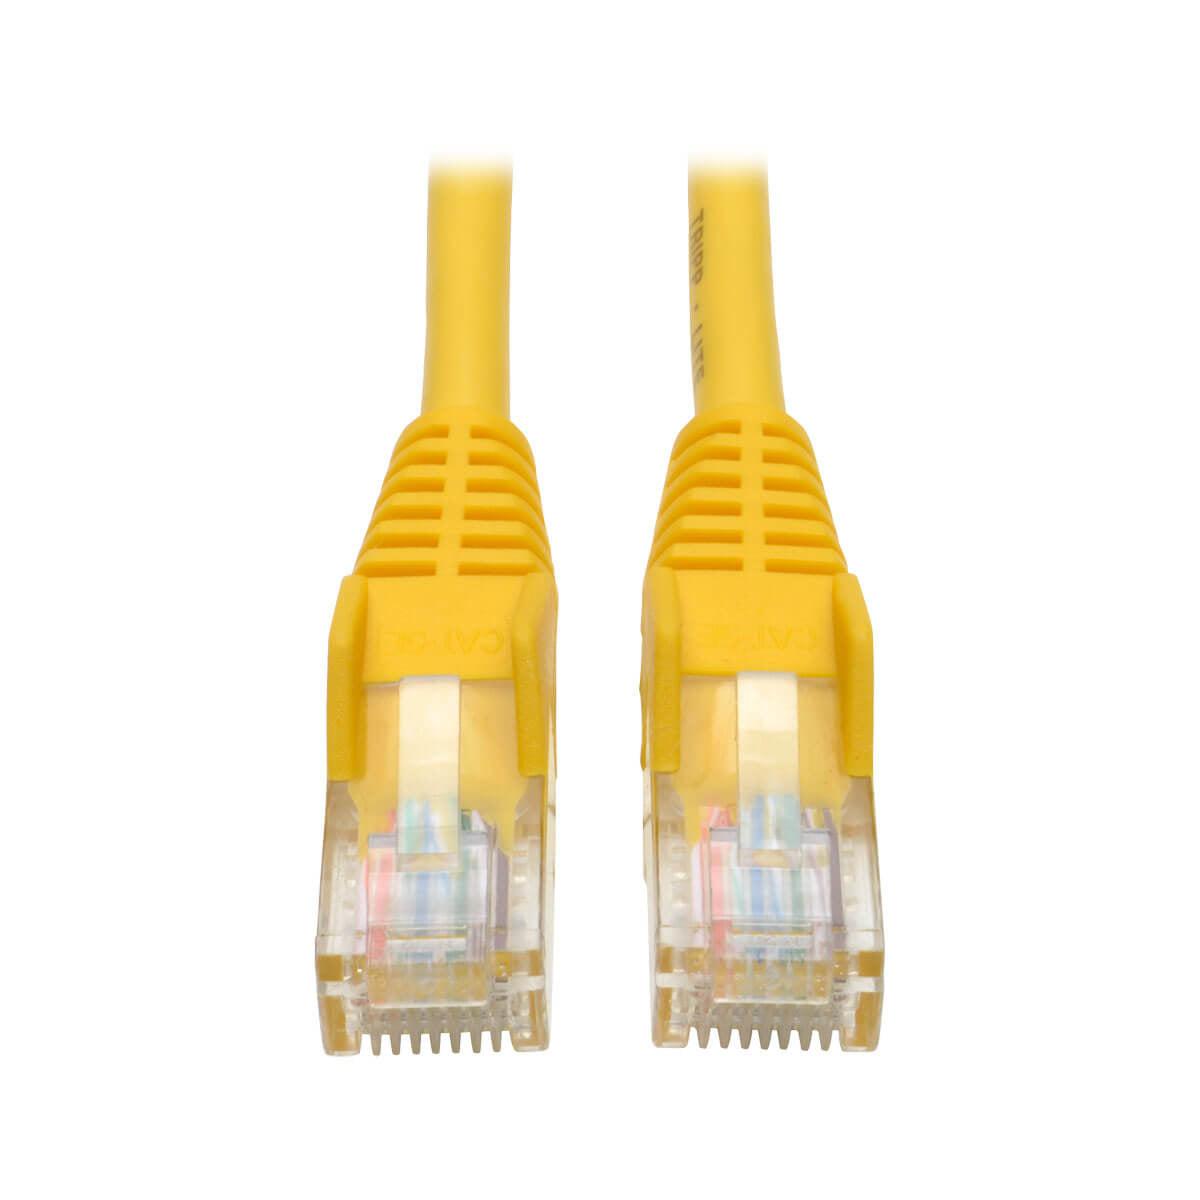 Tripp Lite N001-007-Yw Cat5E 350 Mhz Snagless Molded (Utp) Ethernet Cable (Rj45 M/M) - Yellow, 7 Ft. (2.13 M)